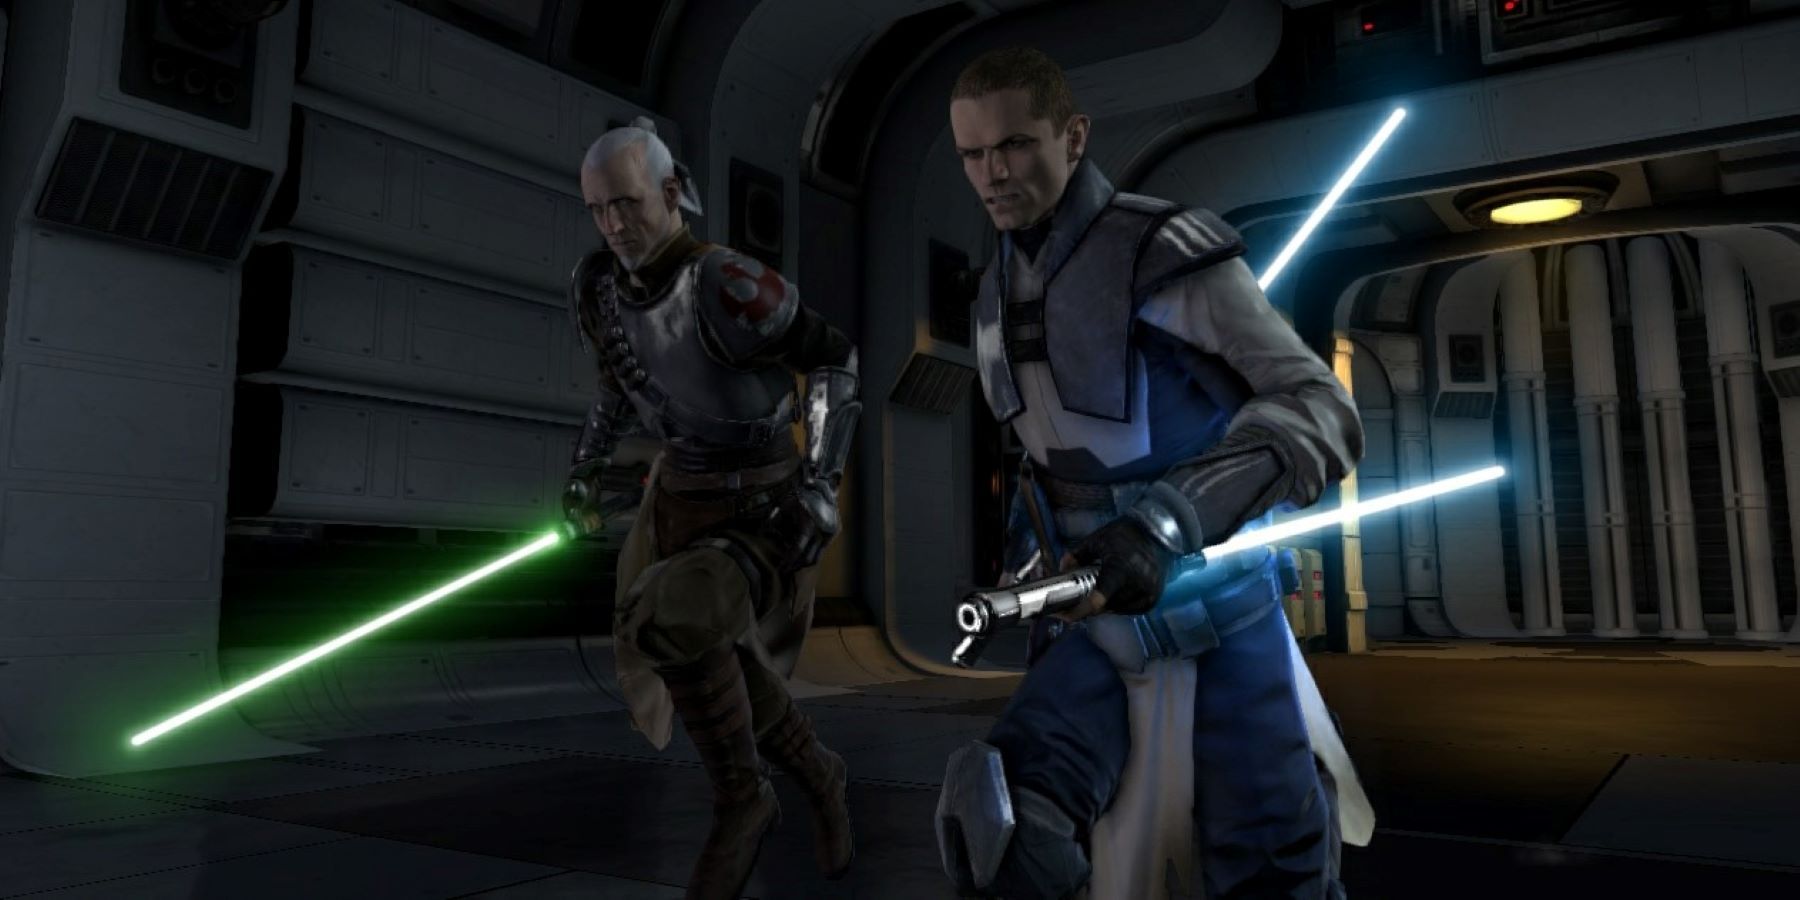 Starkiller's clone and Rahm Kota running with lightsabers drawn in Star Wars: The Force Unleashed 2